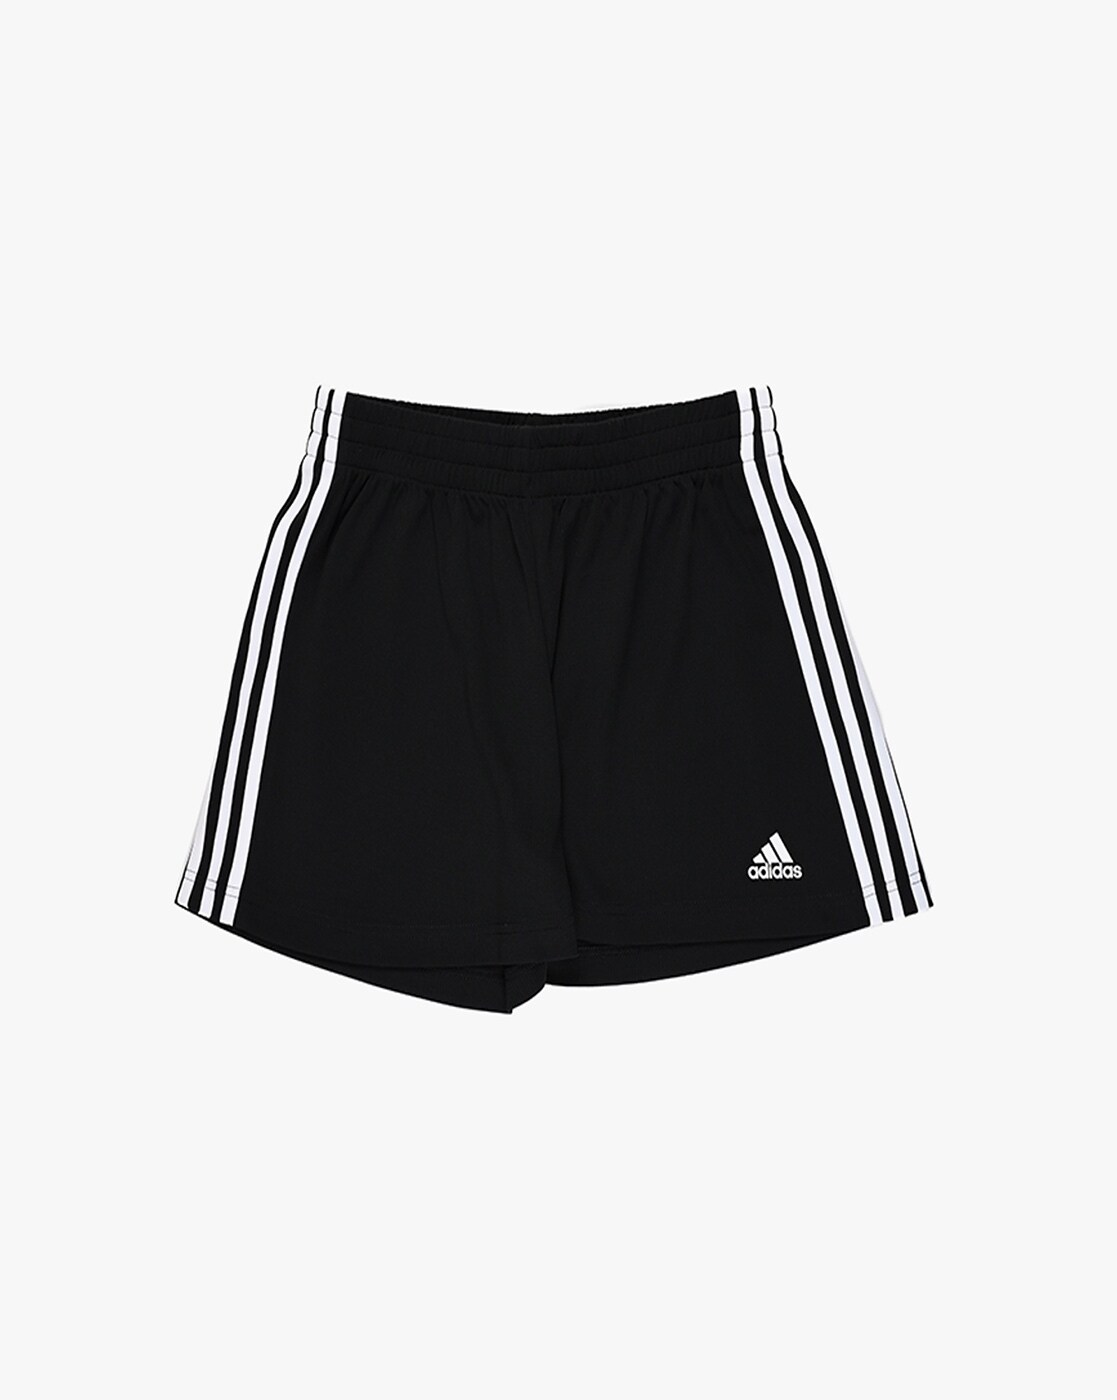 Buy Adidas Youth MLB New York Yankees 3 Stripe Athletic Short, 14/16 -  Large Online at Low Prices in India 